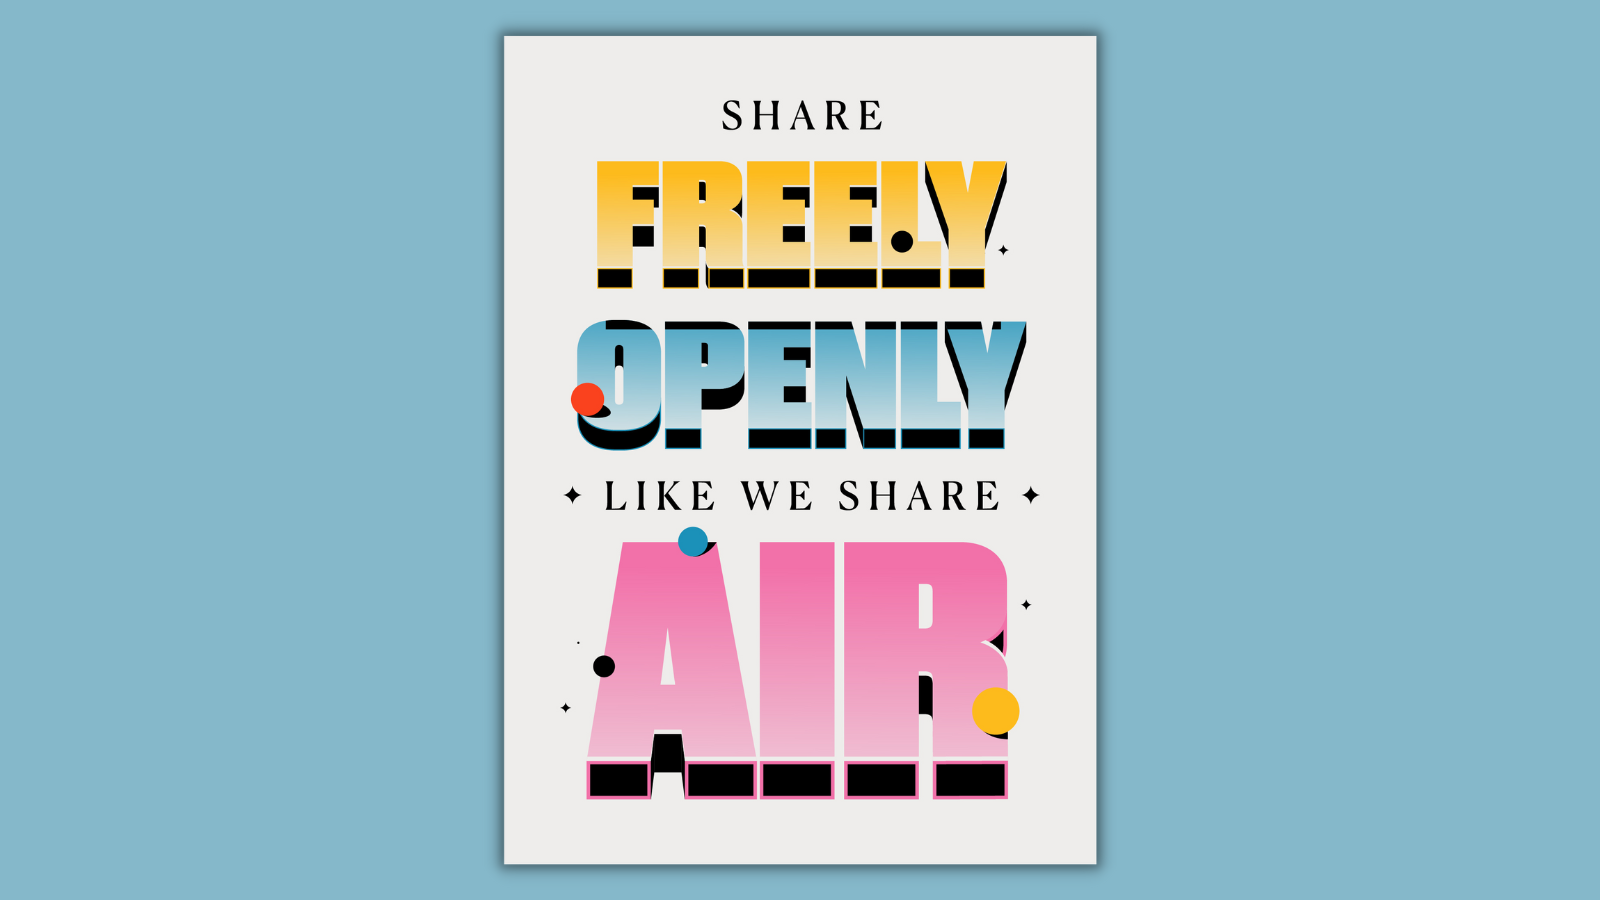 Share Freely Openly Like We Share Air Creative Commons